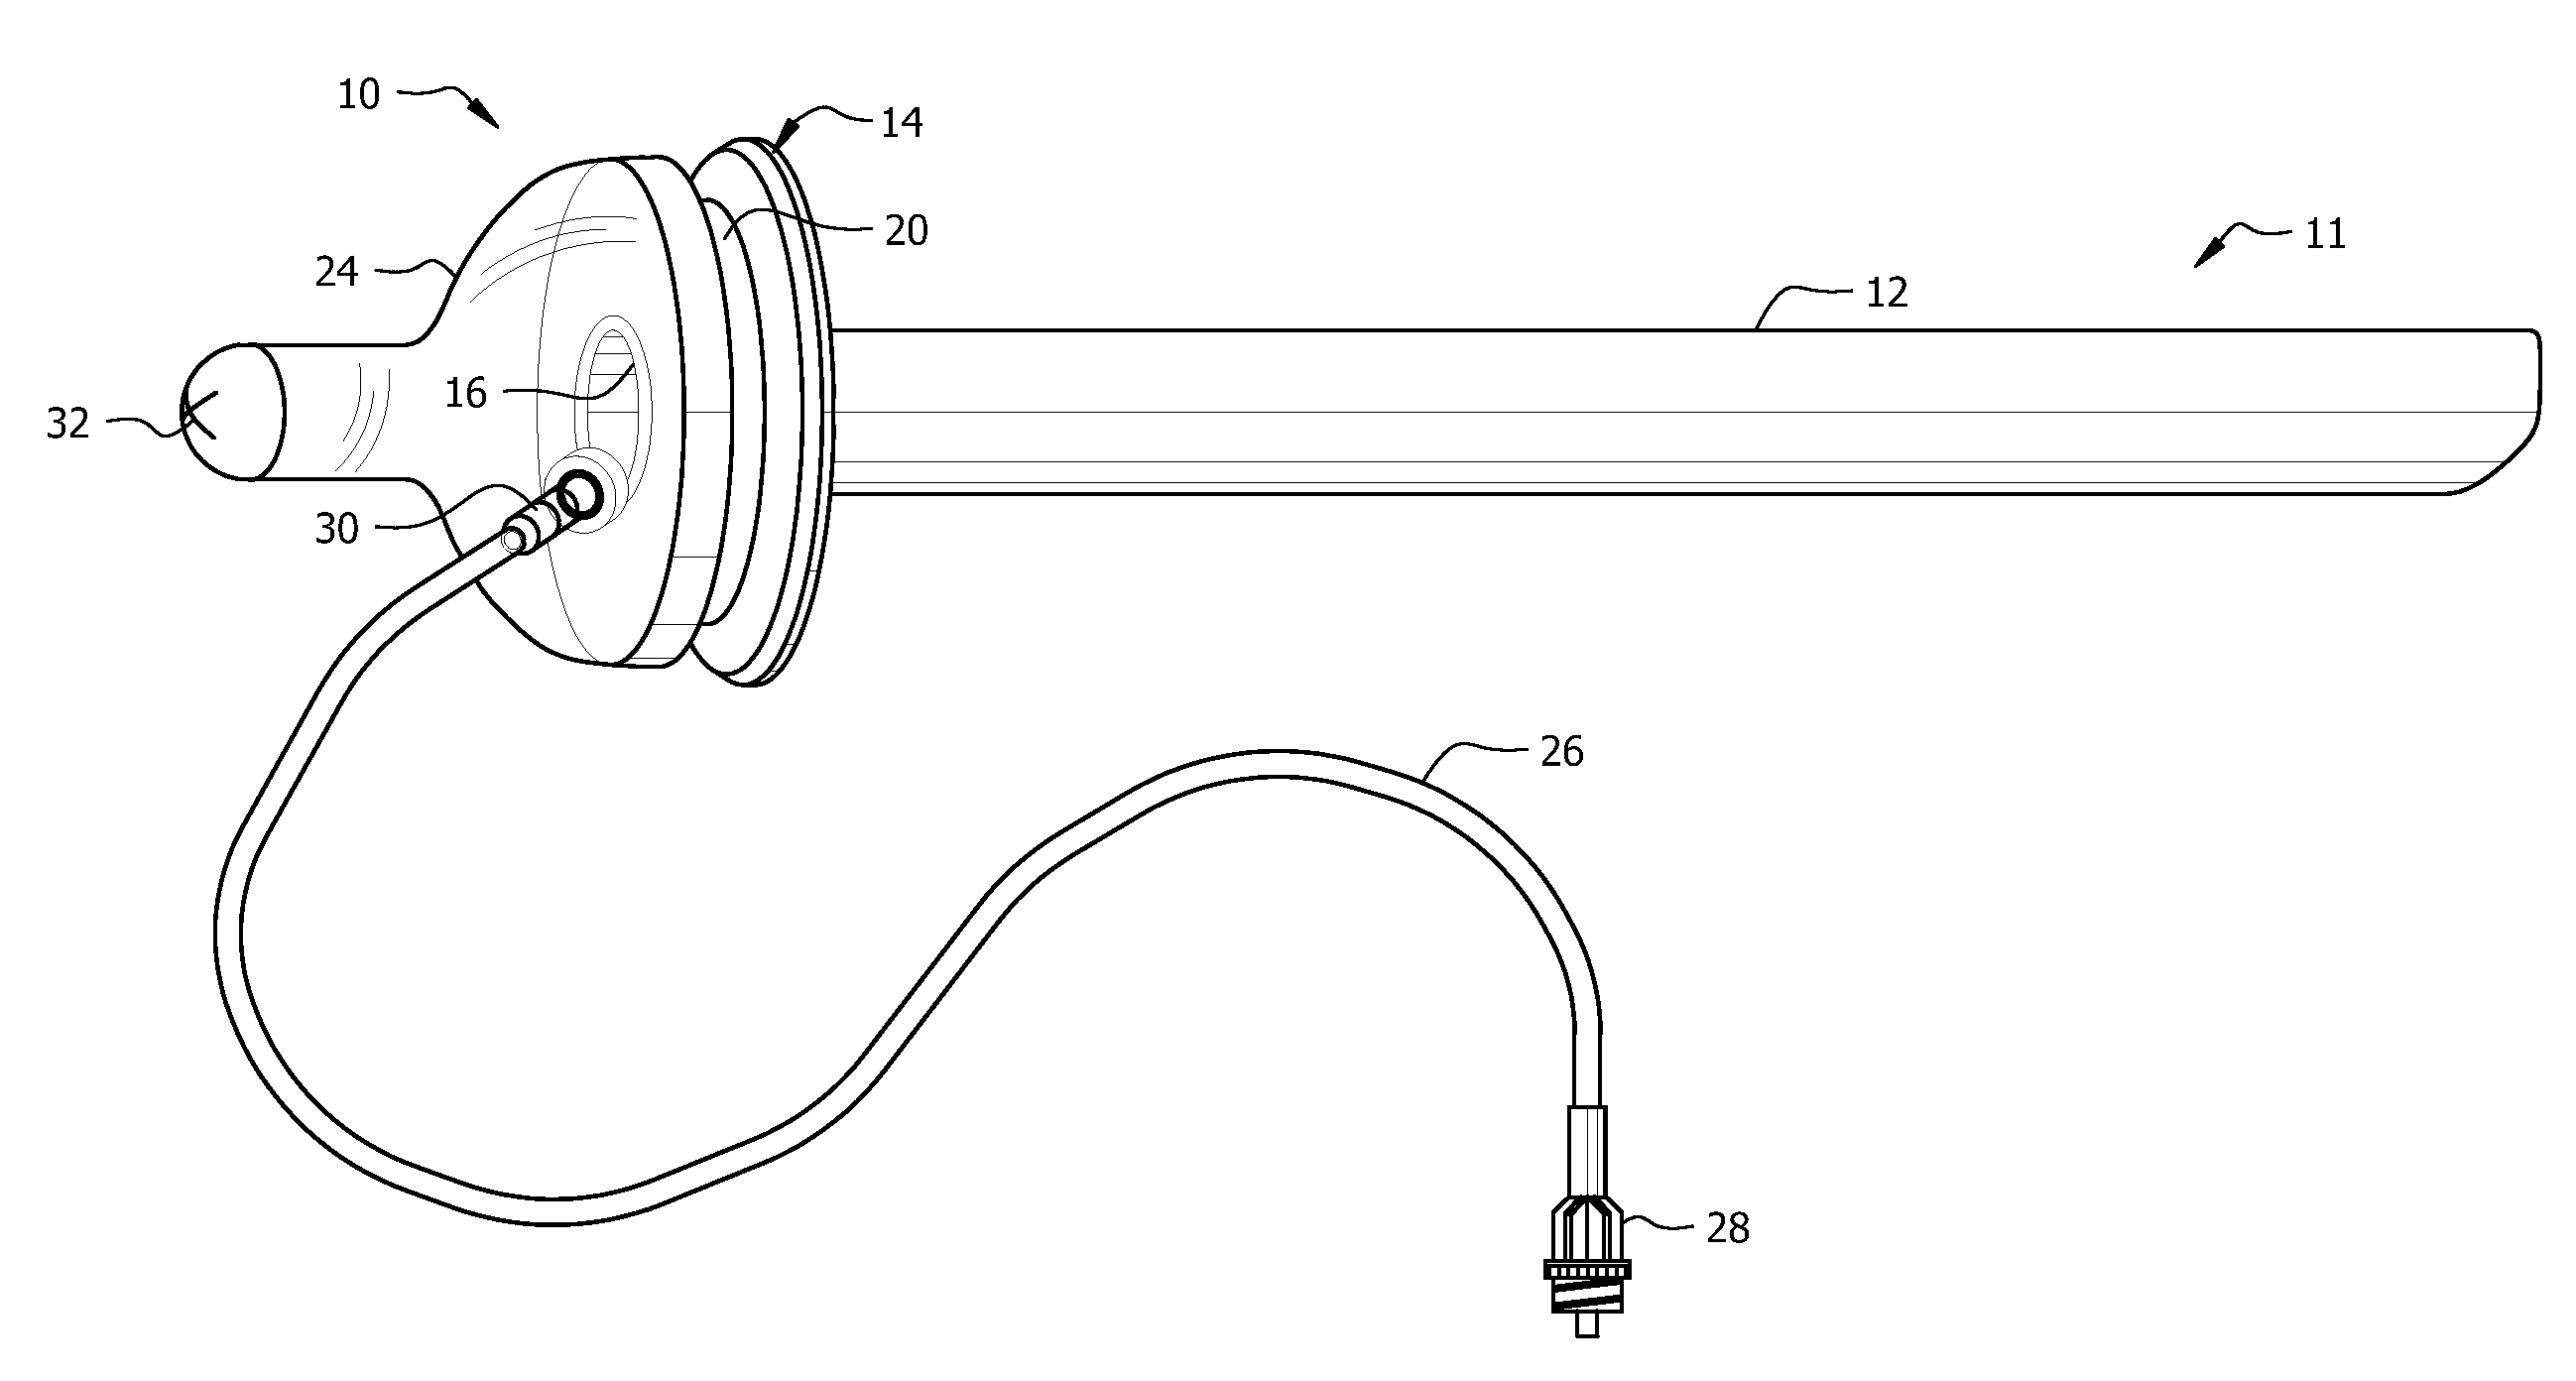 Adaptor for connecting a cannula to a gas machine